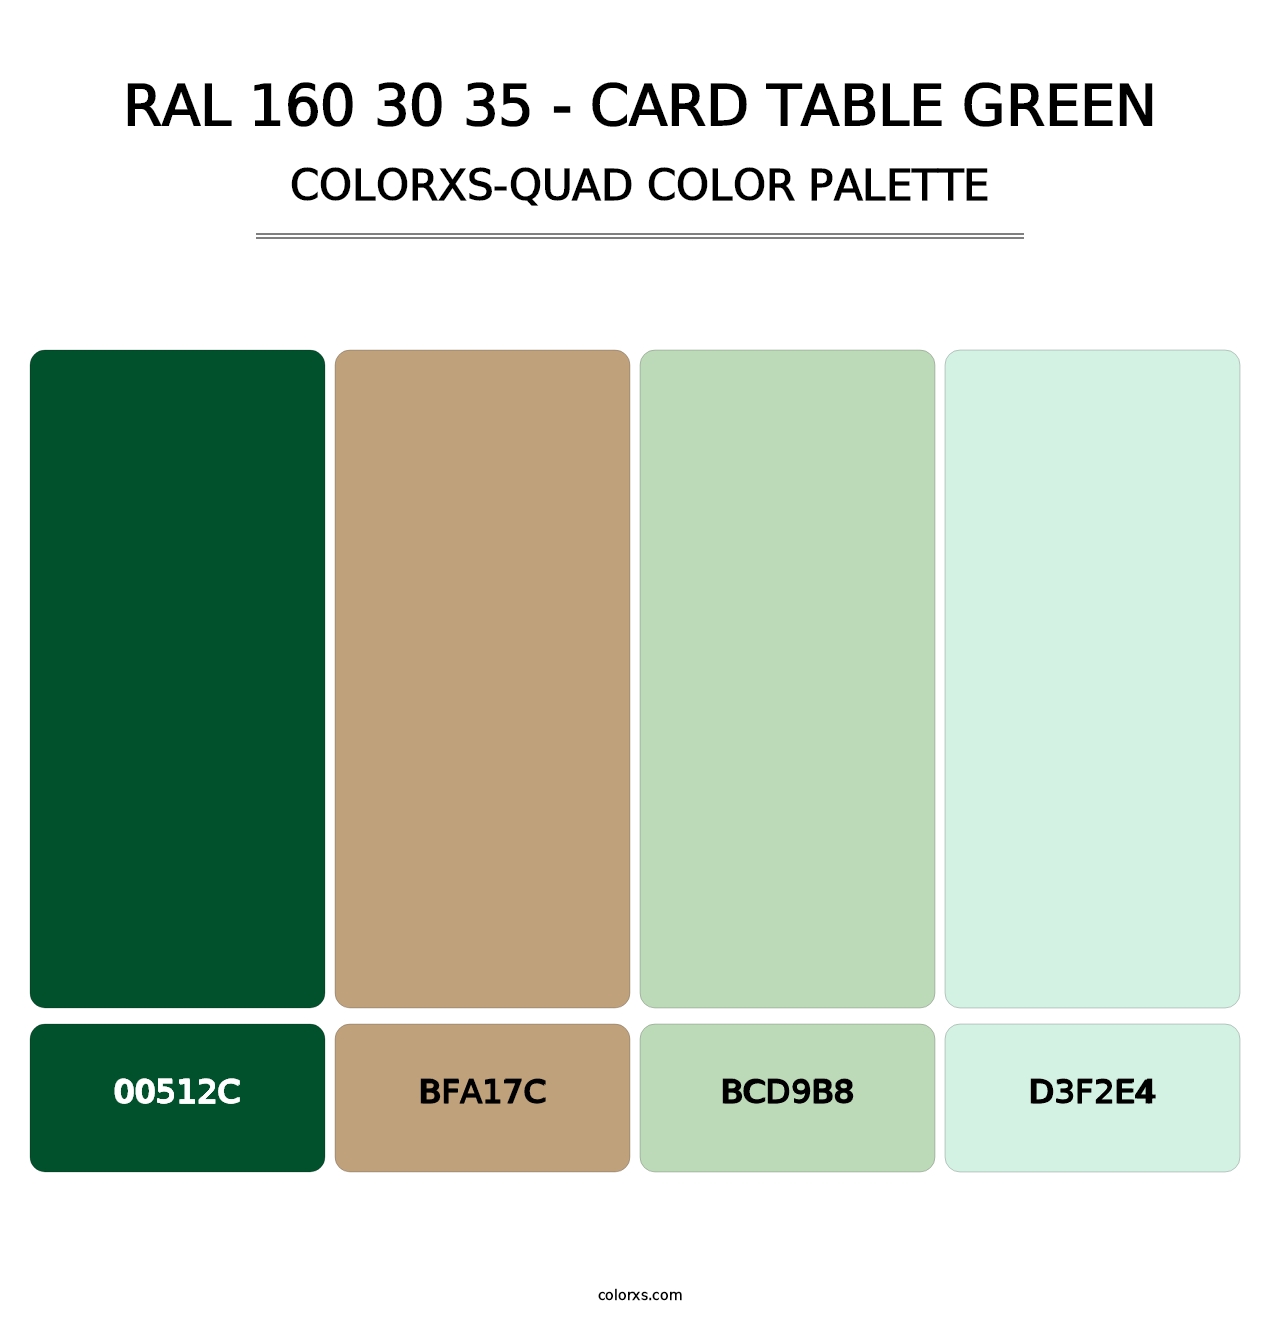 RAL 160 30 35 - Card Table Green - Colorxs Quad Palette